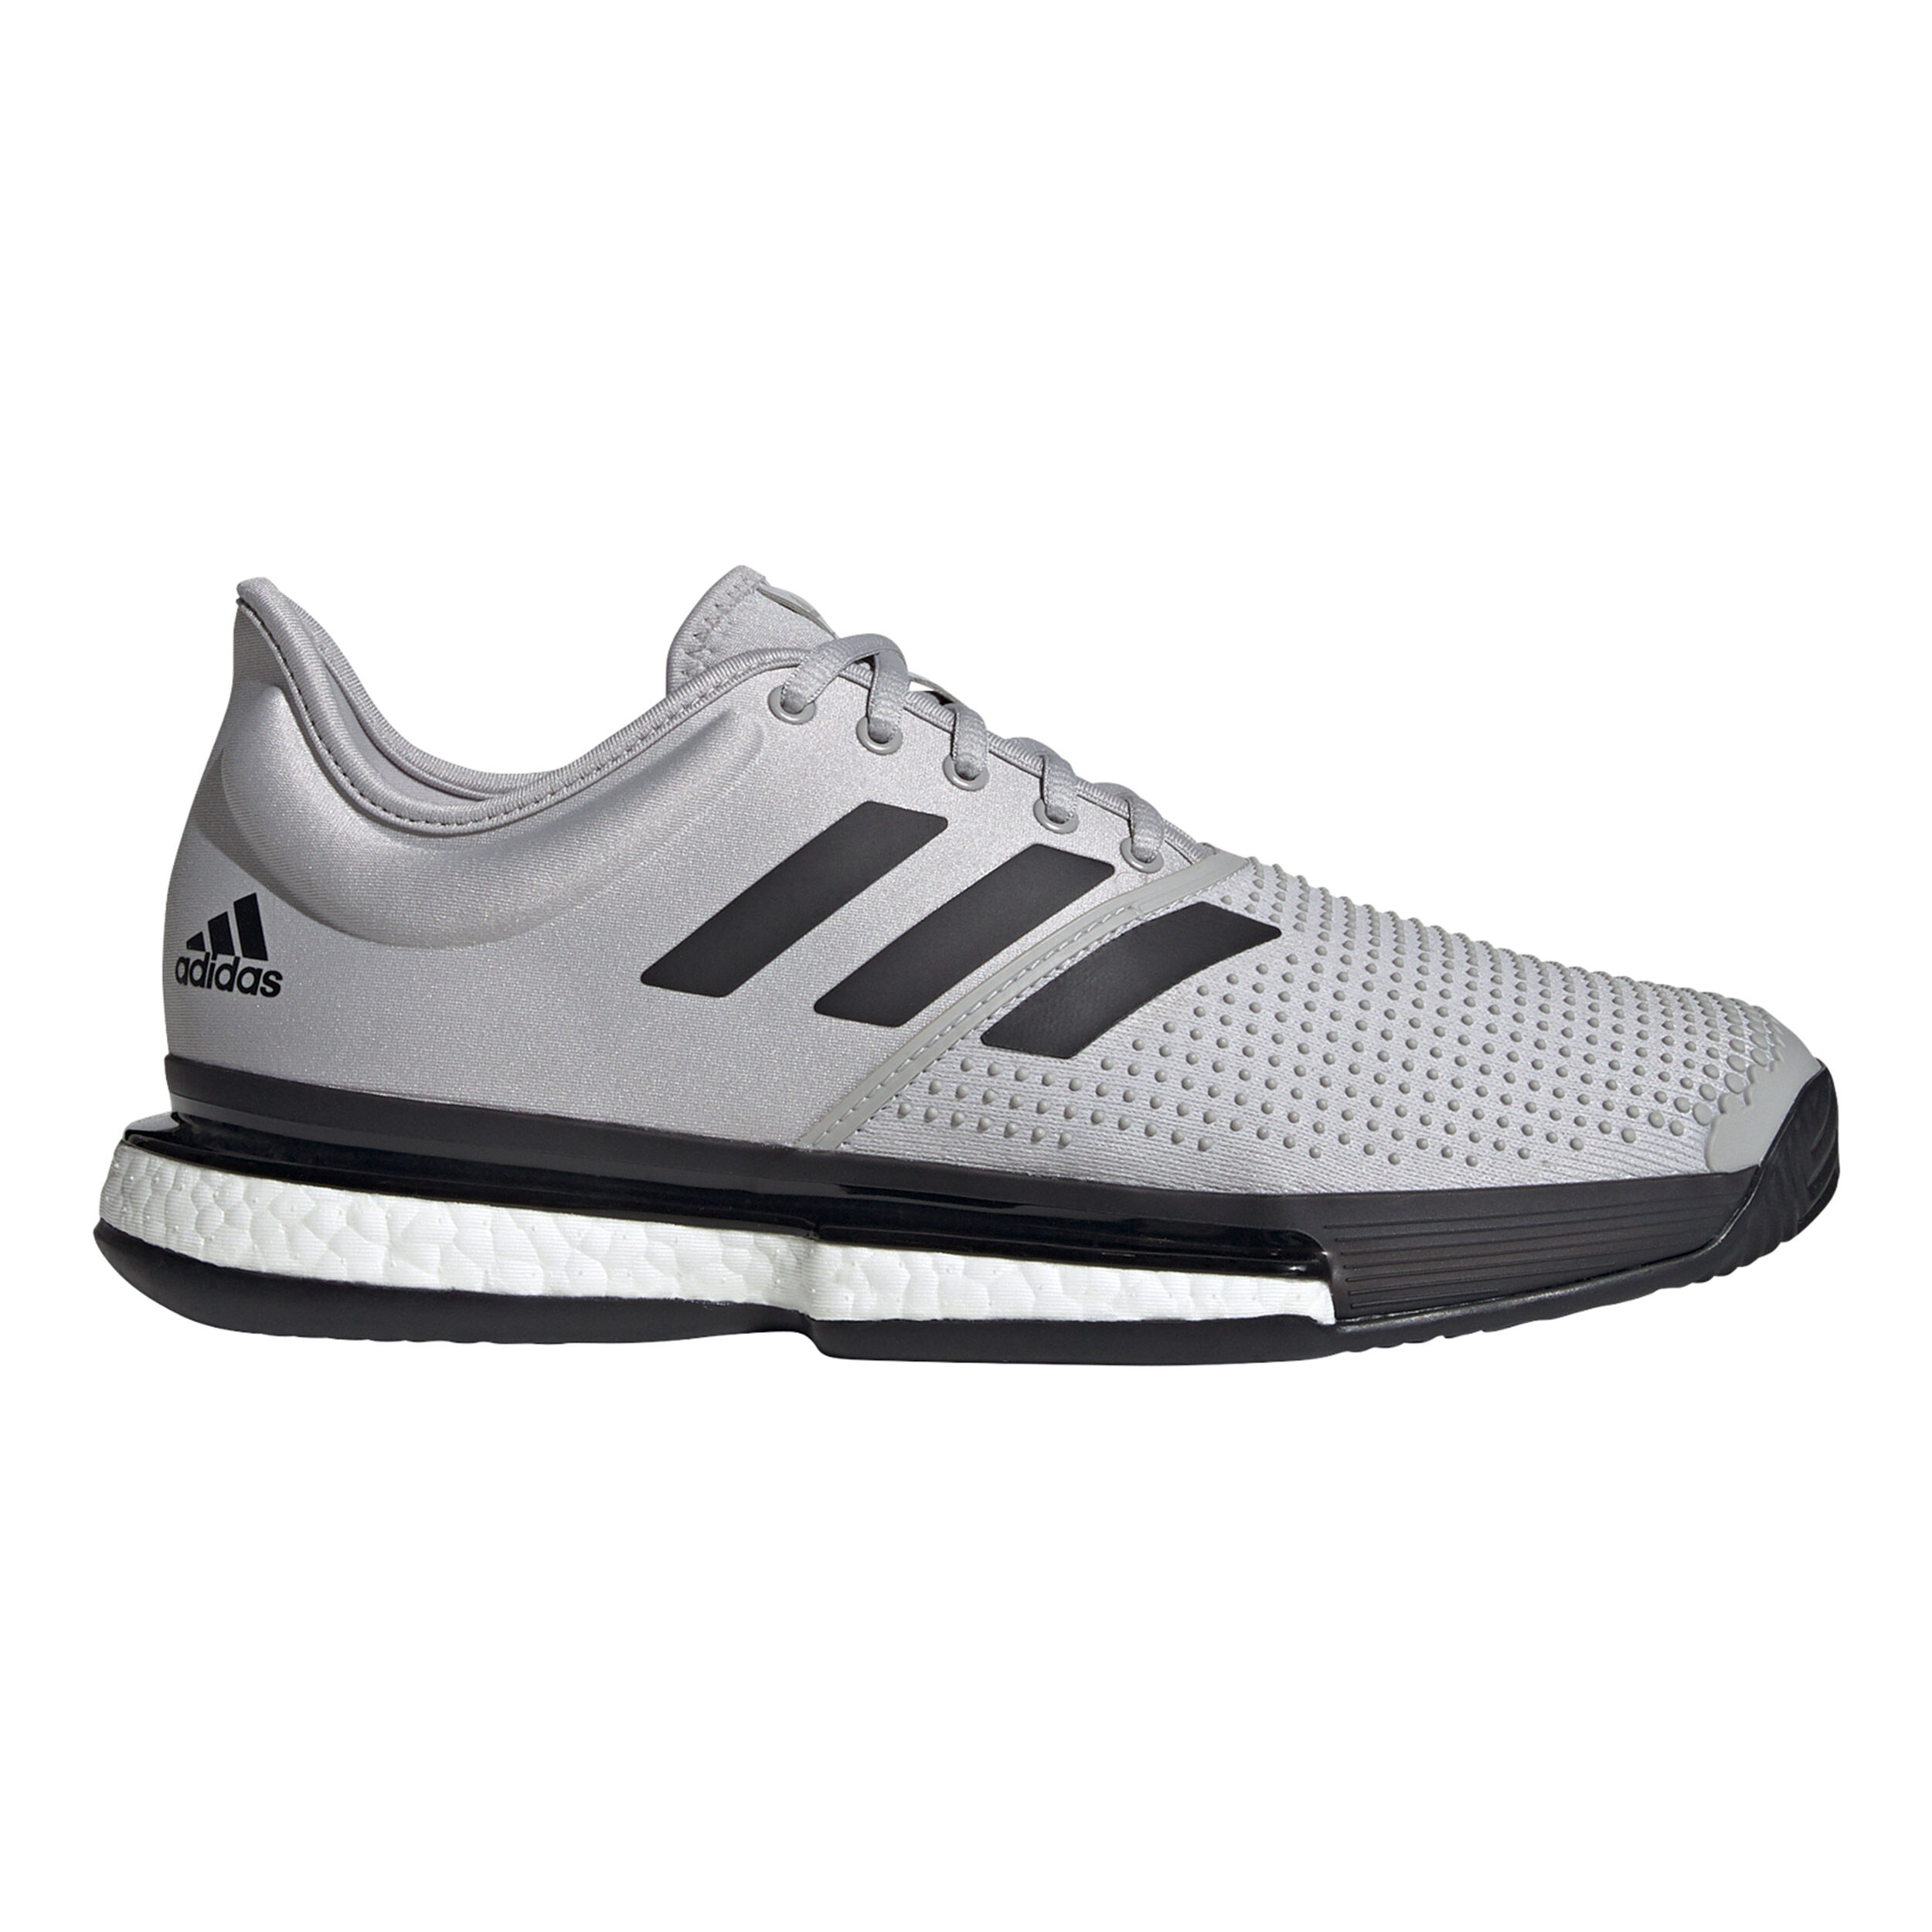 Buy Tennis shoes from adidas online 